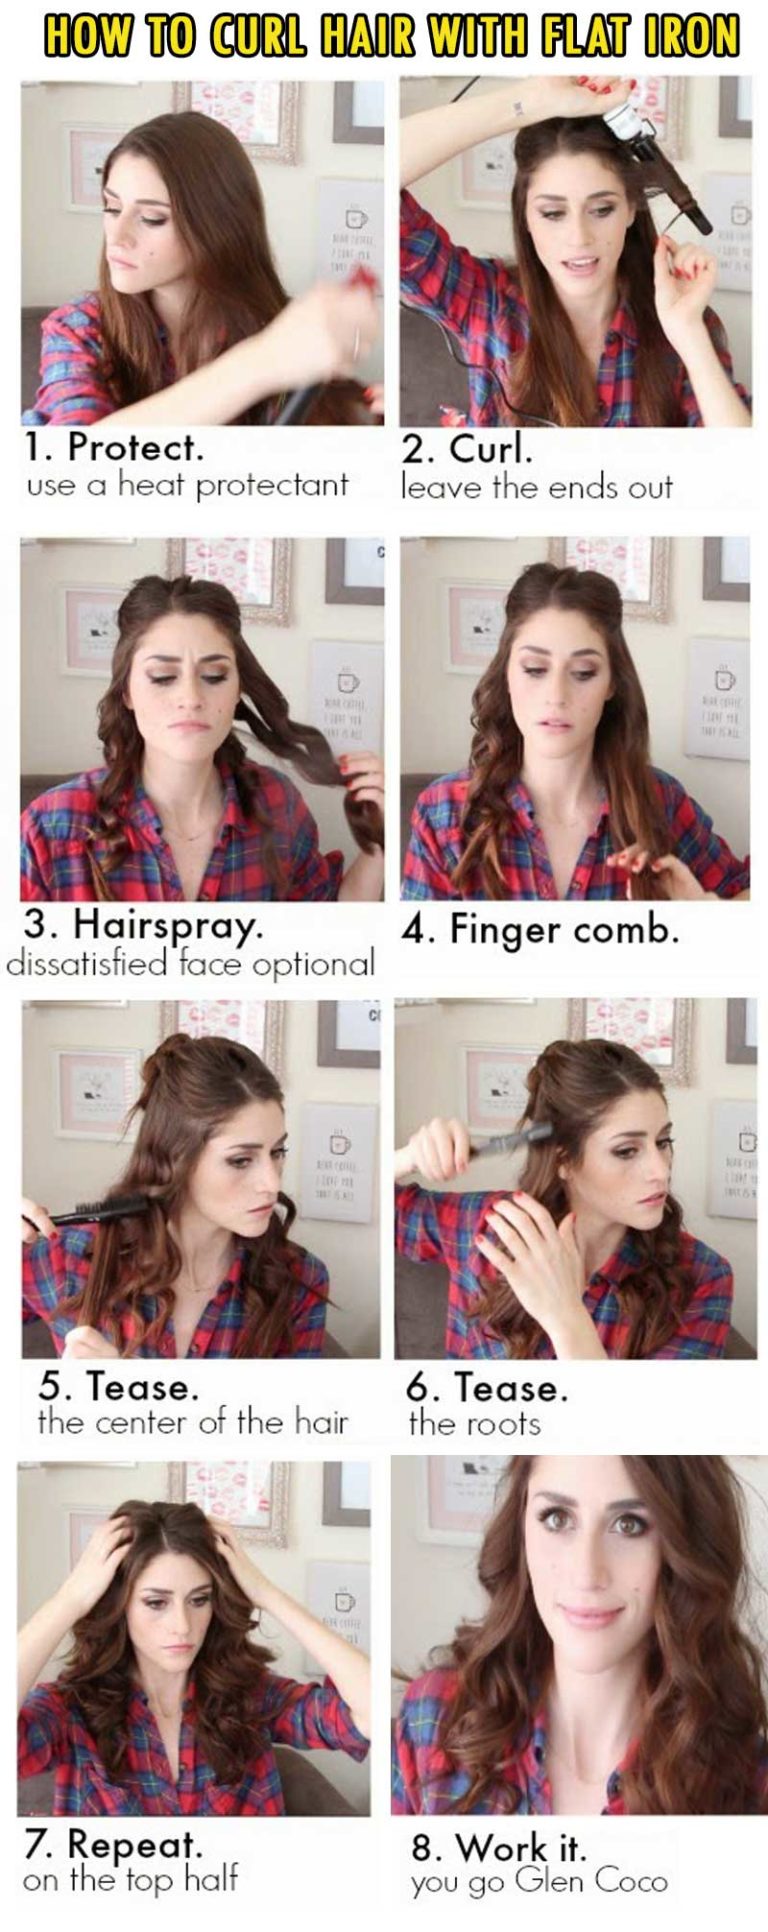 how to curl hair with flat iron